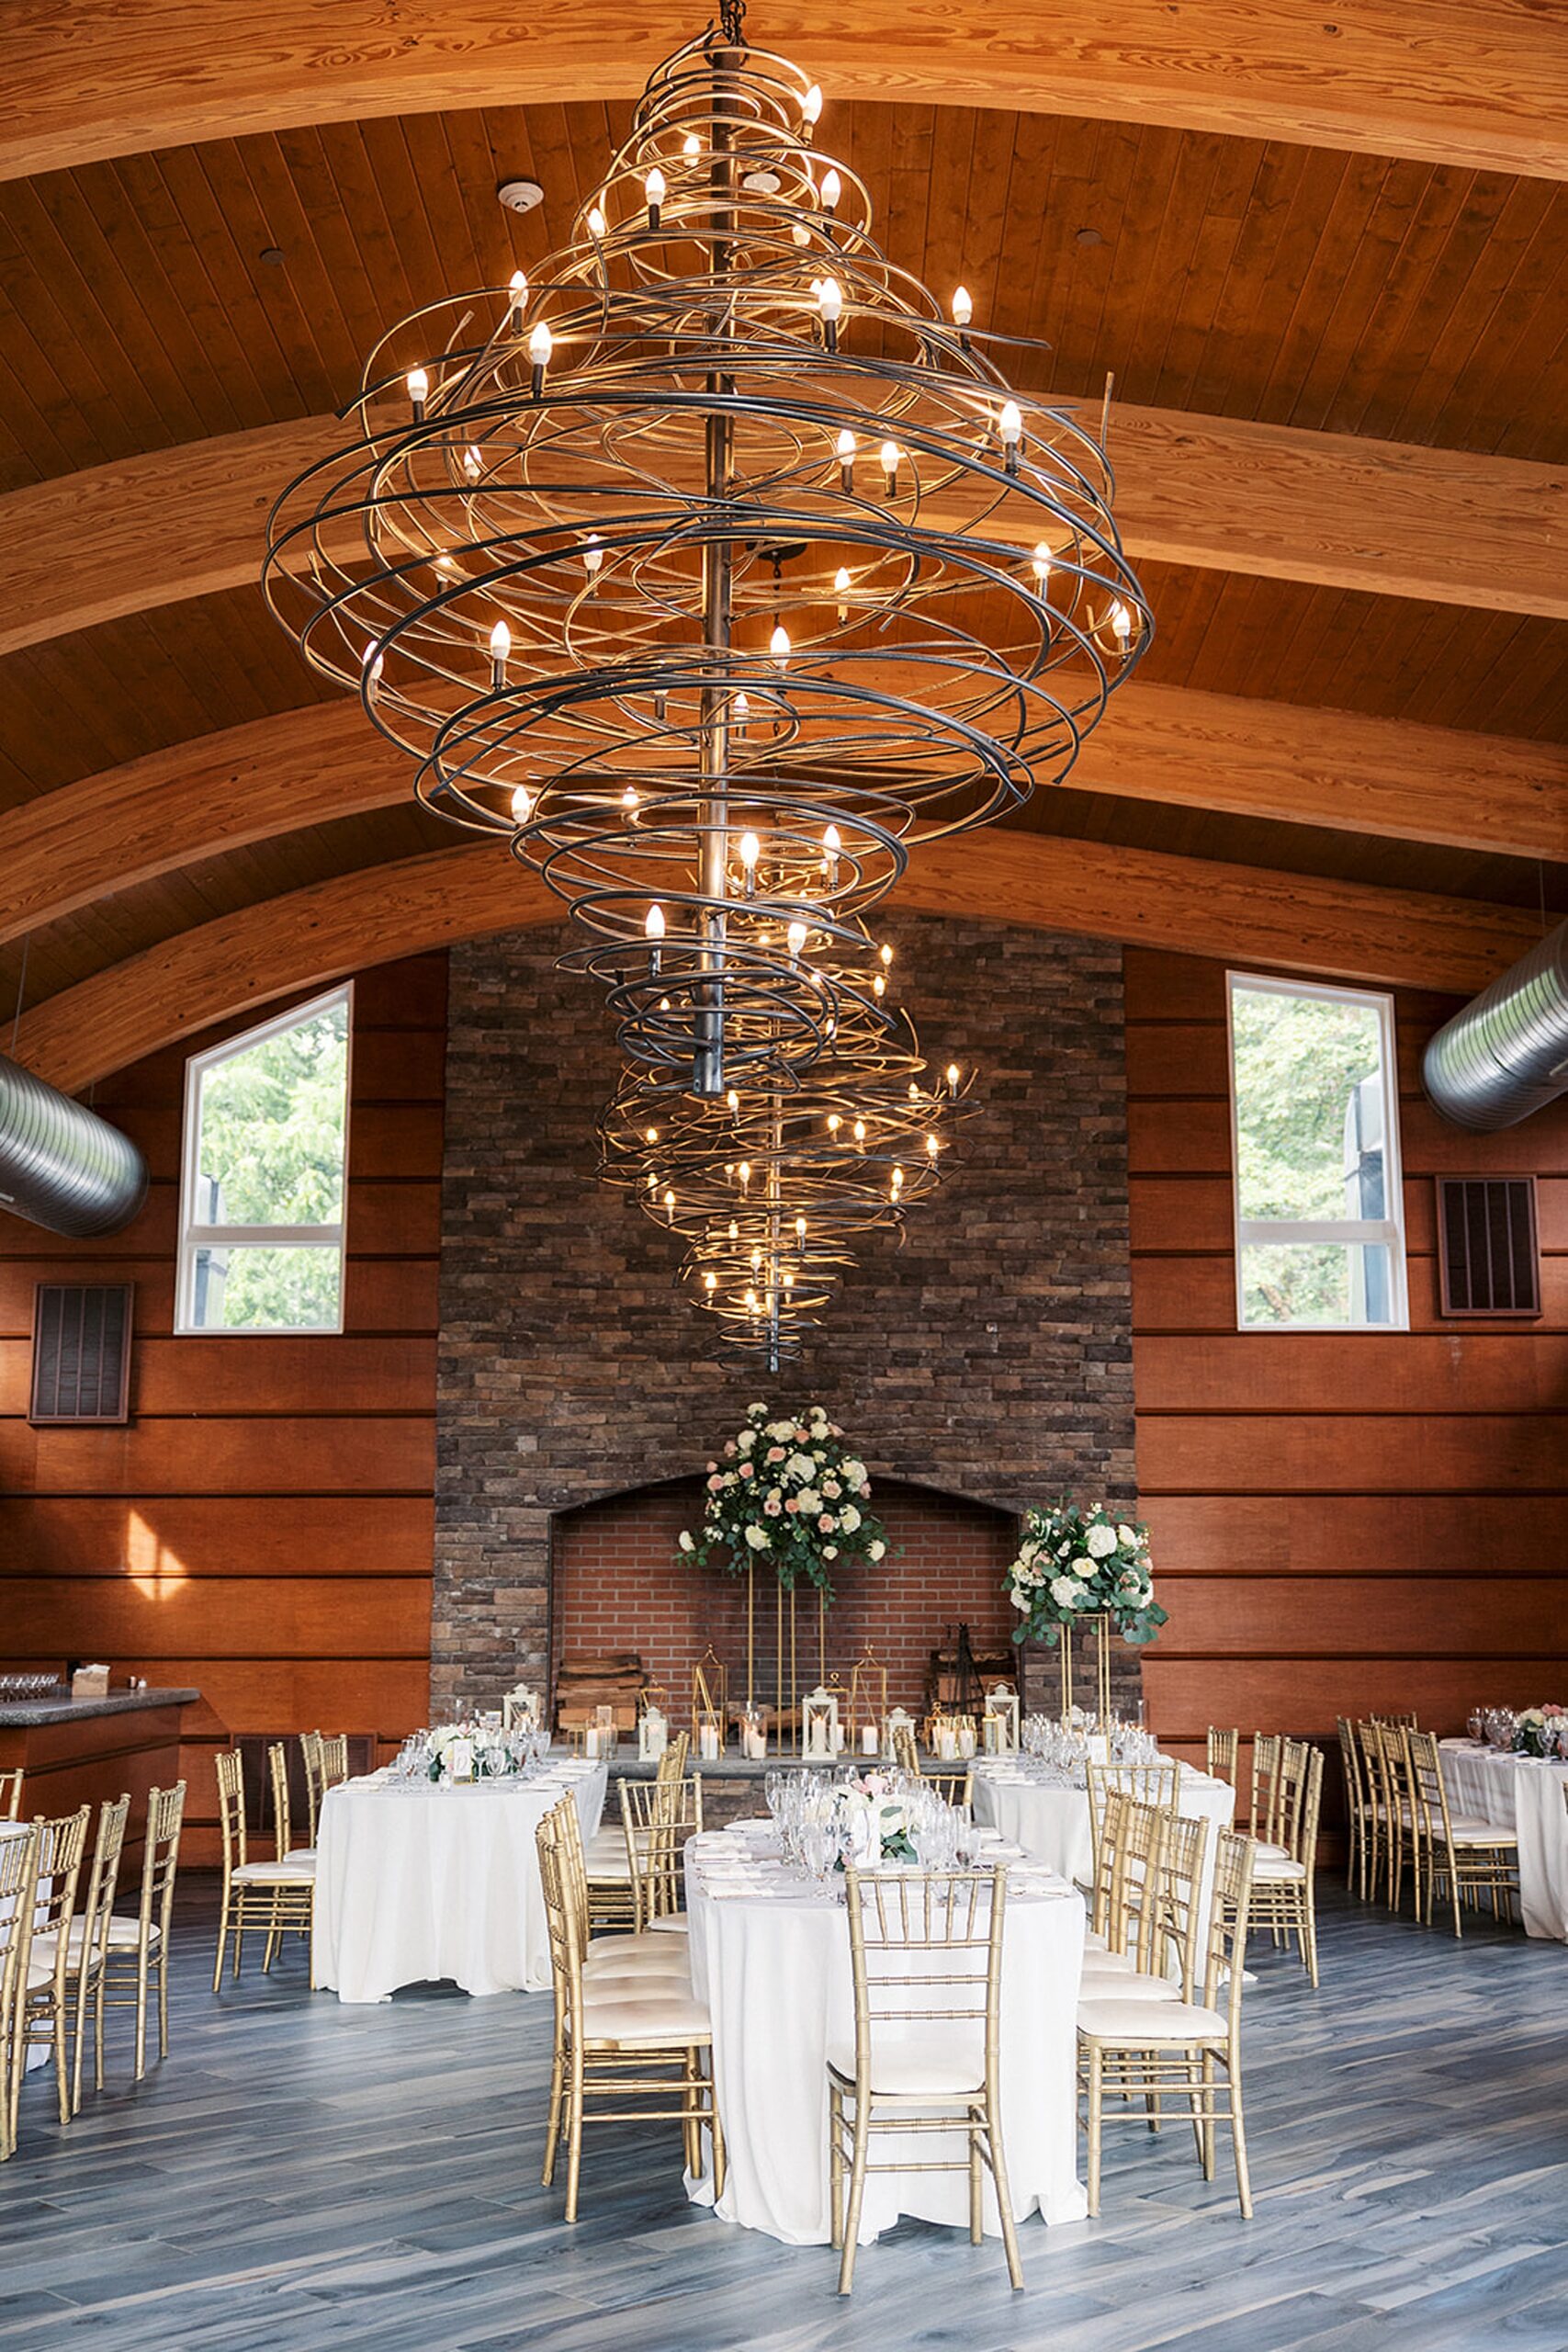 Details of a Stonehouse At Stirling Ridge Wedding reception set up with modern chandeliers and a large stone fireplace